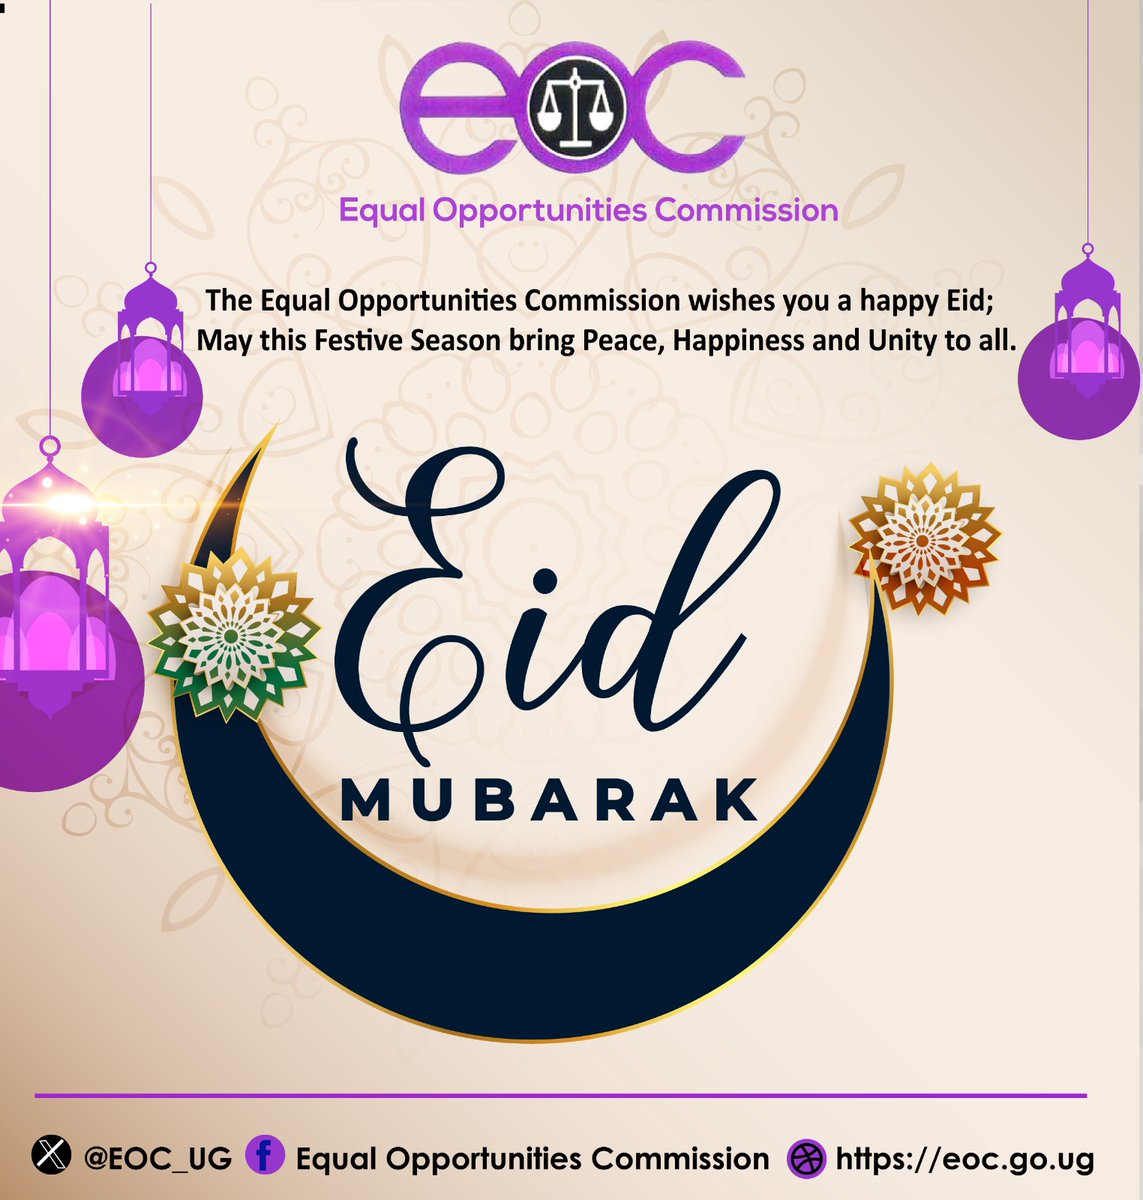 May the Almighty Allah open the doors of happiness, prosperity, good health, unity, joy and love for you and your loved ones! Happy Eid Mubarak.